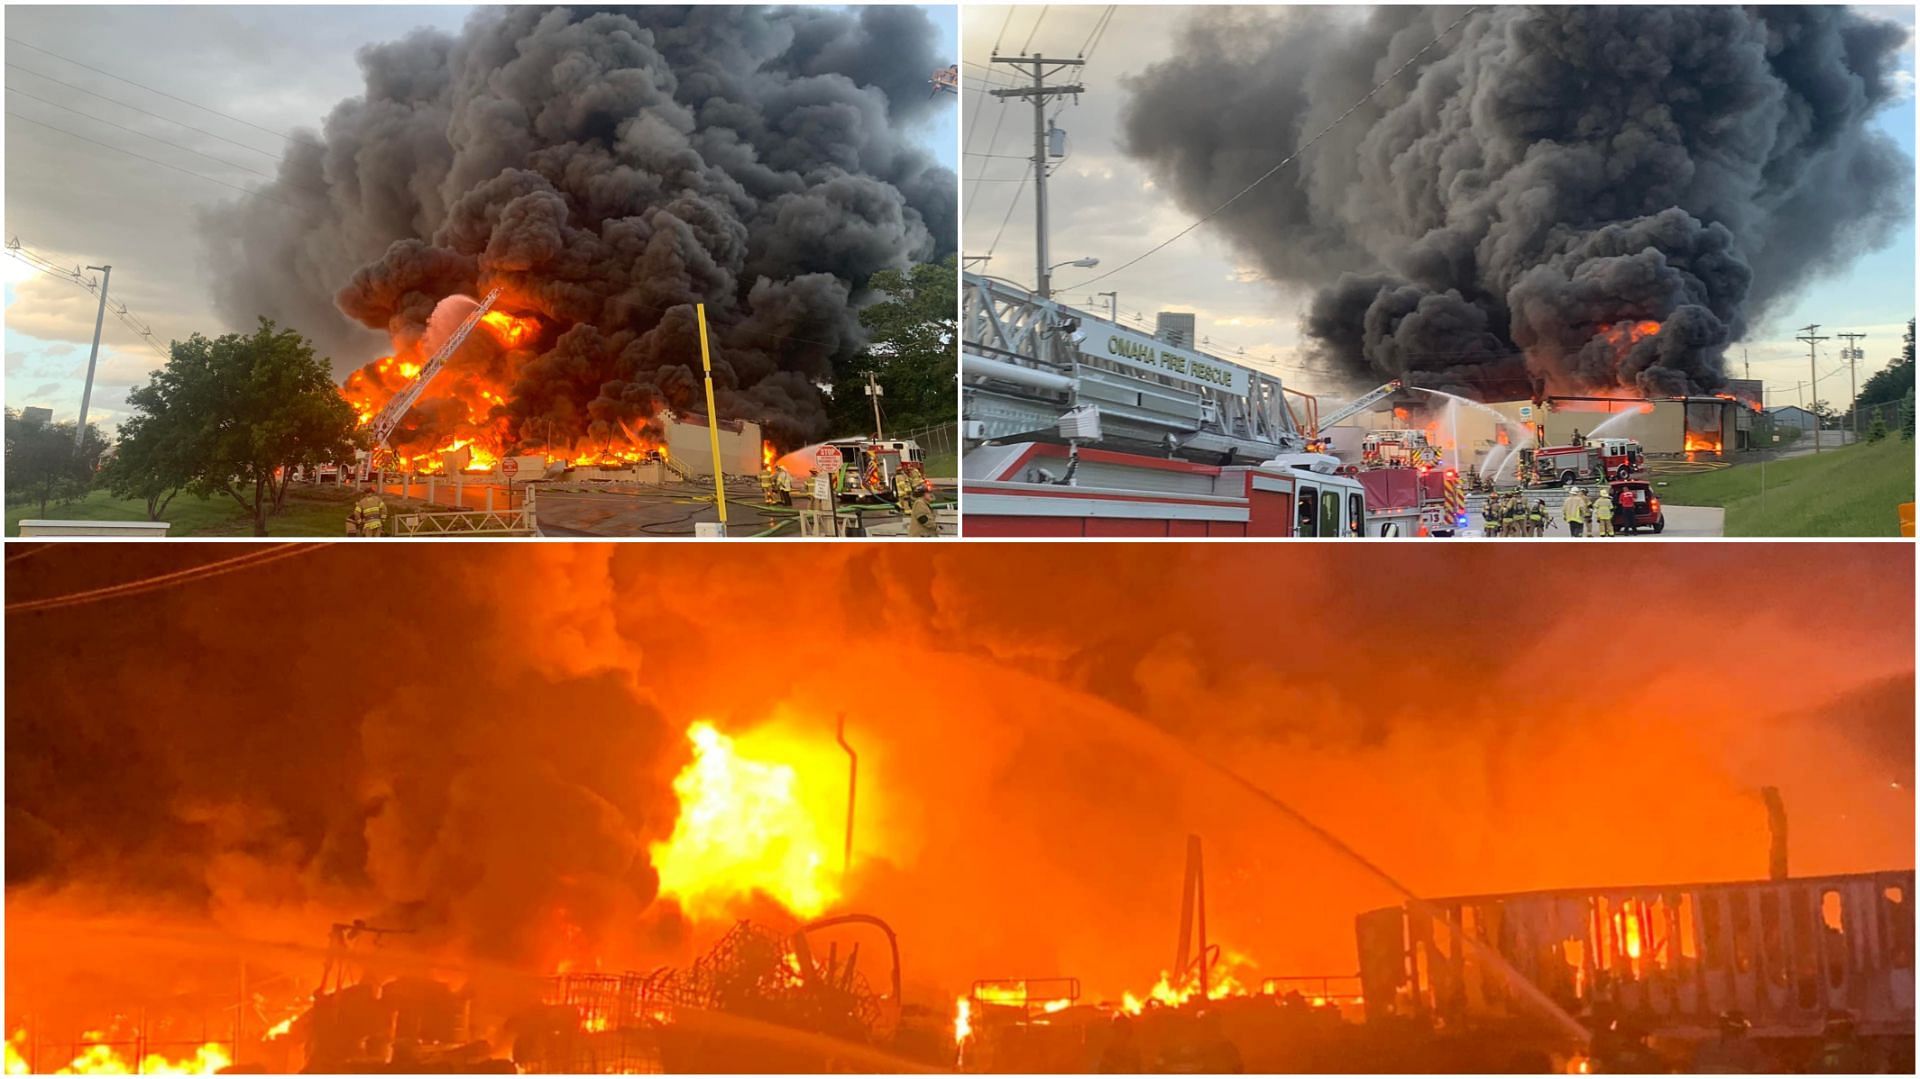 Residents urged to evacuate as 3 alarm fire breaks out in Omaha chemical company (via Facebook/Omaha Fire Department)